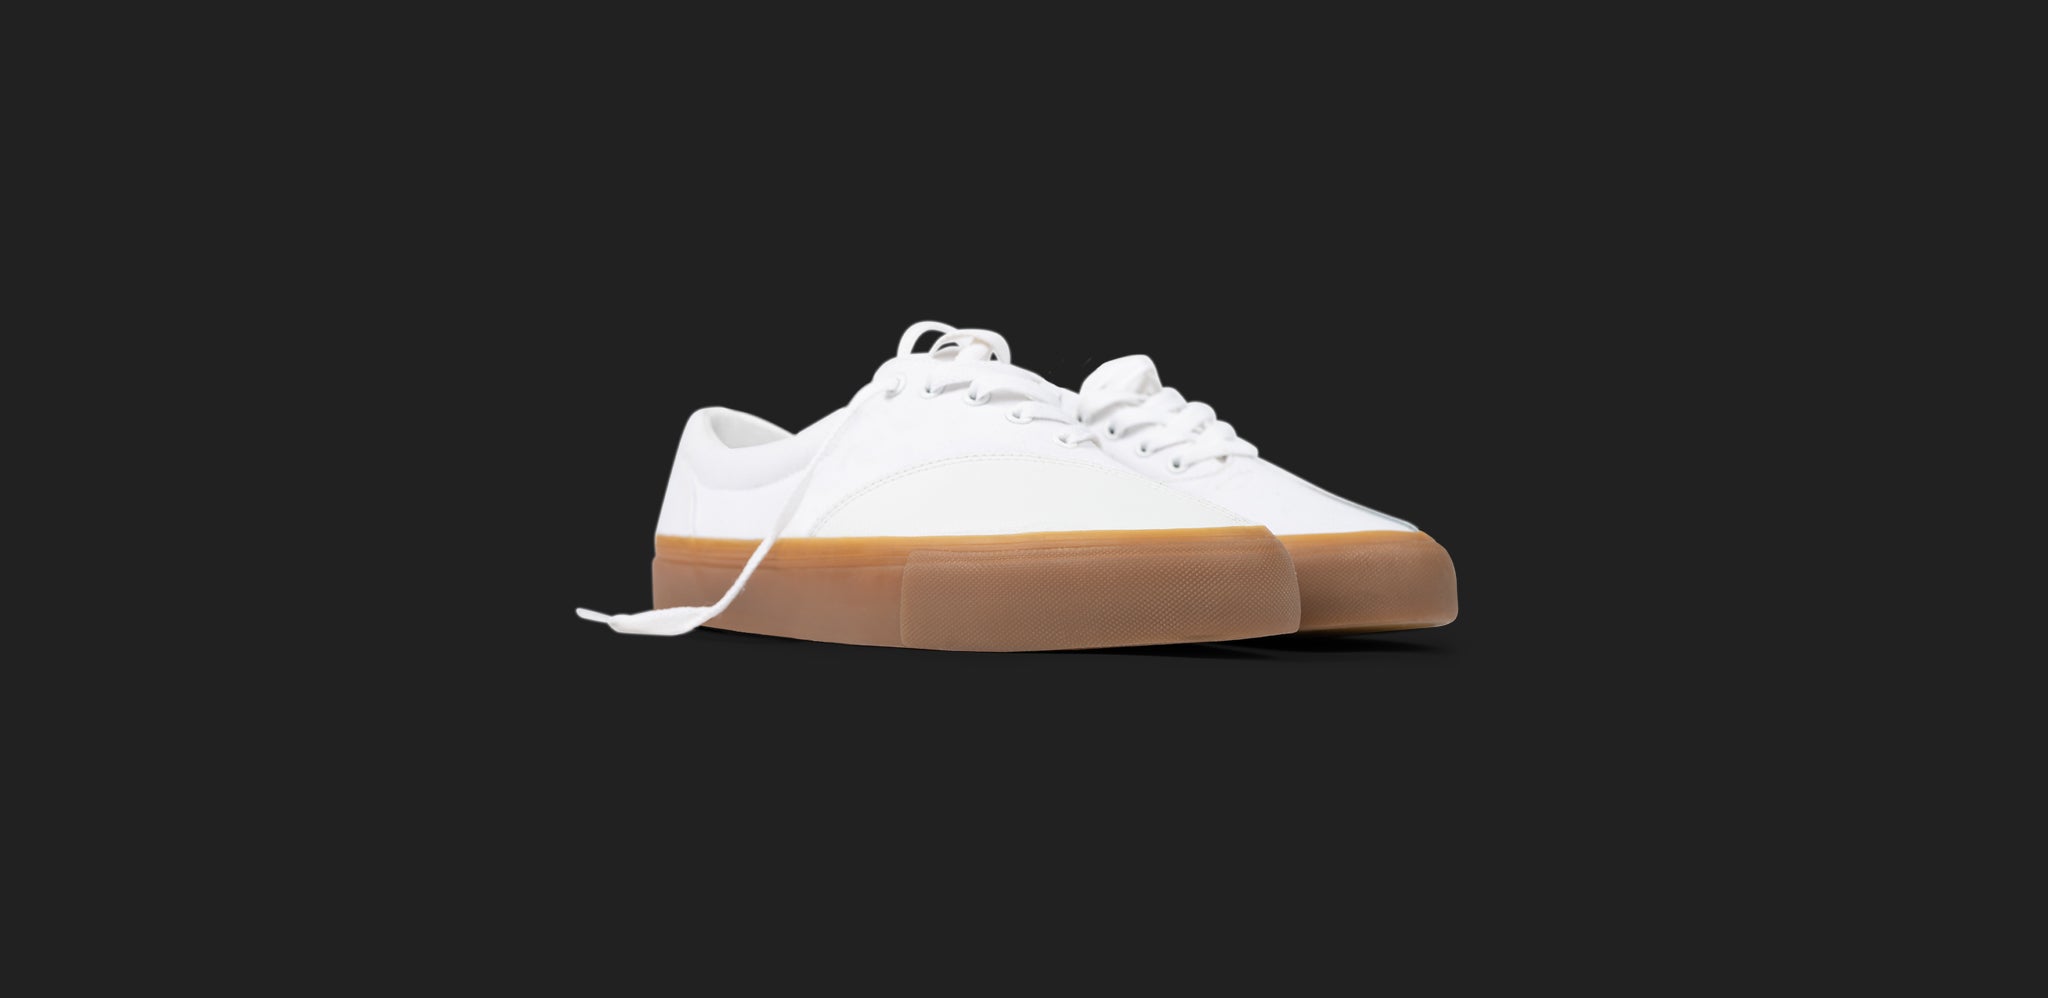 New Colorway of the Donny Releases: White/Gum